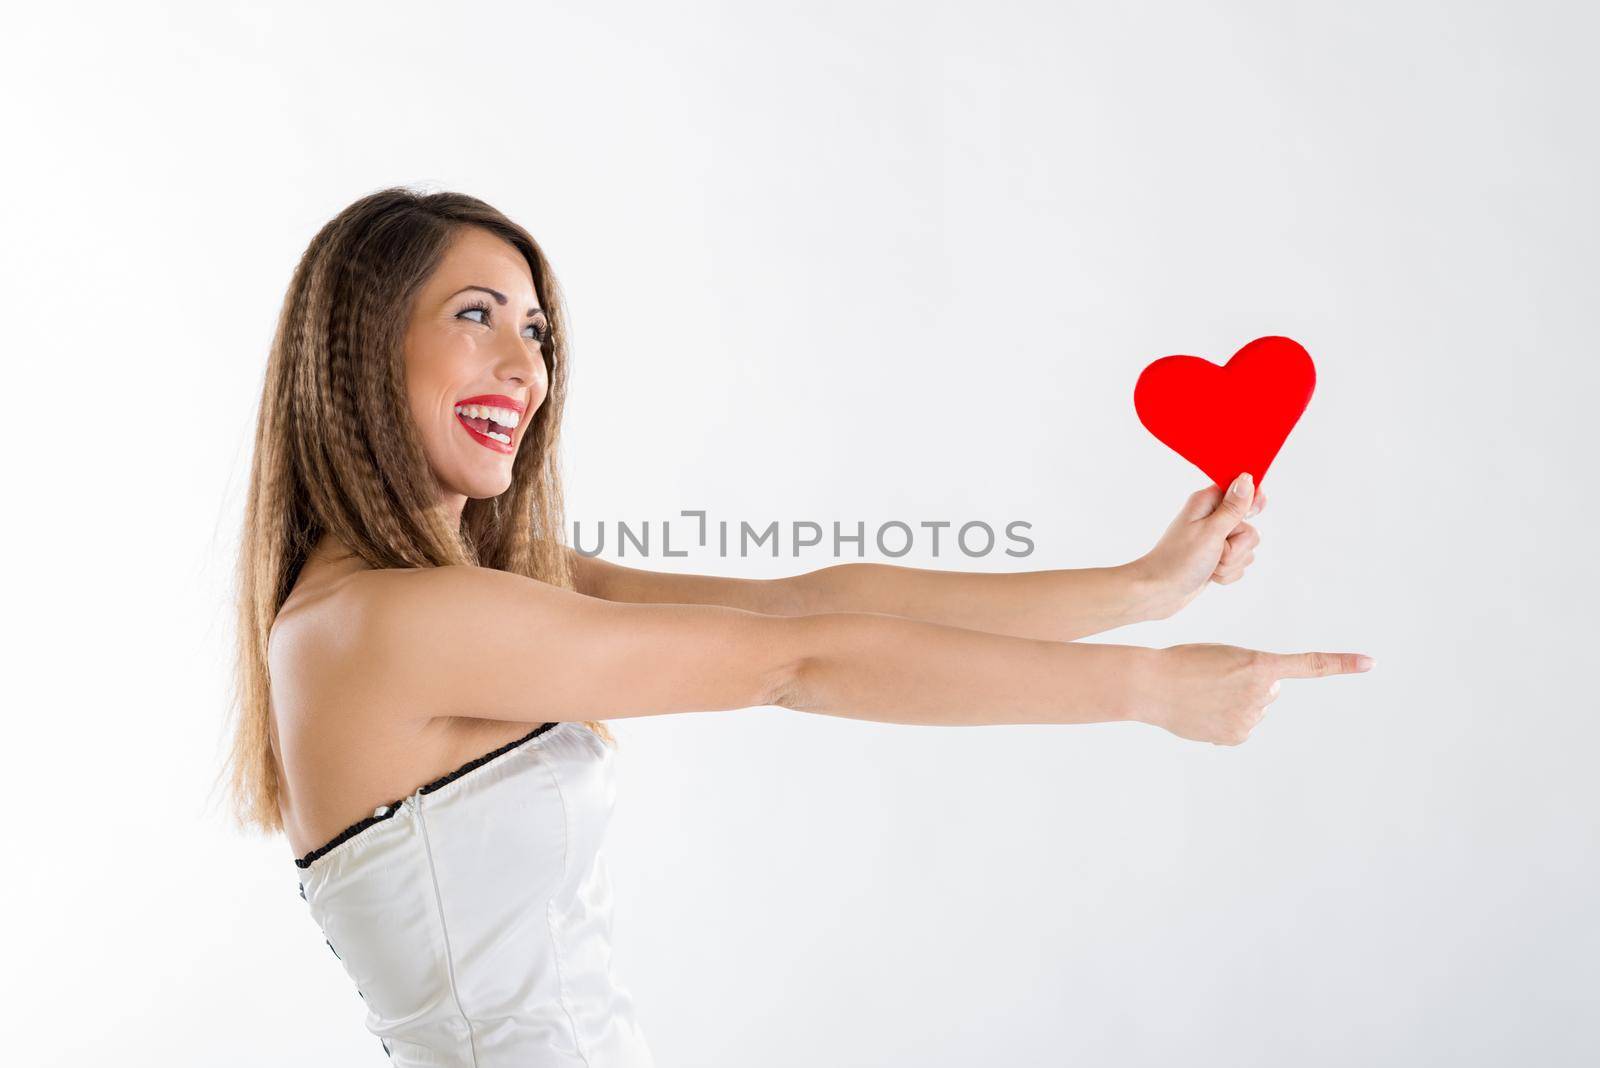 Beautiful cheerful girl standing, holding red heart and pointing something.